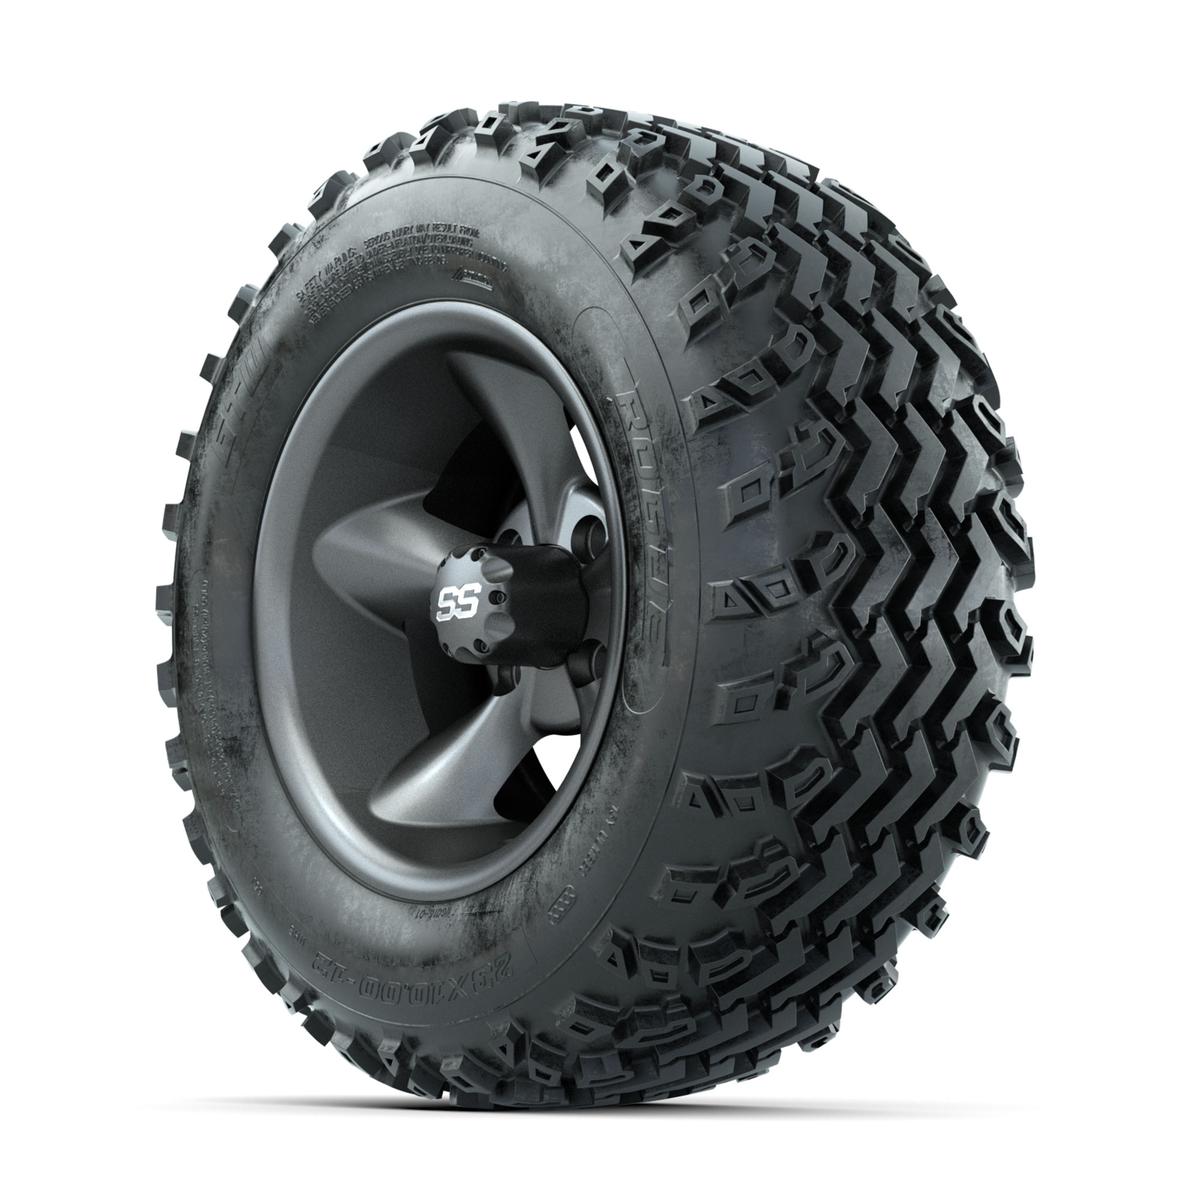 GTW Stellar Machined/Black 12 in Wheels with 23x10.00-12 Rogue All Terrain Tires – Full Set